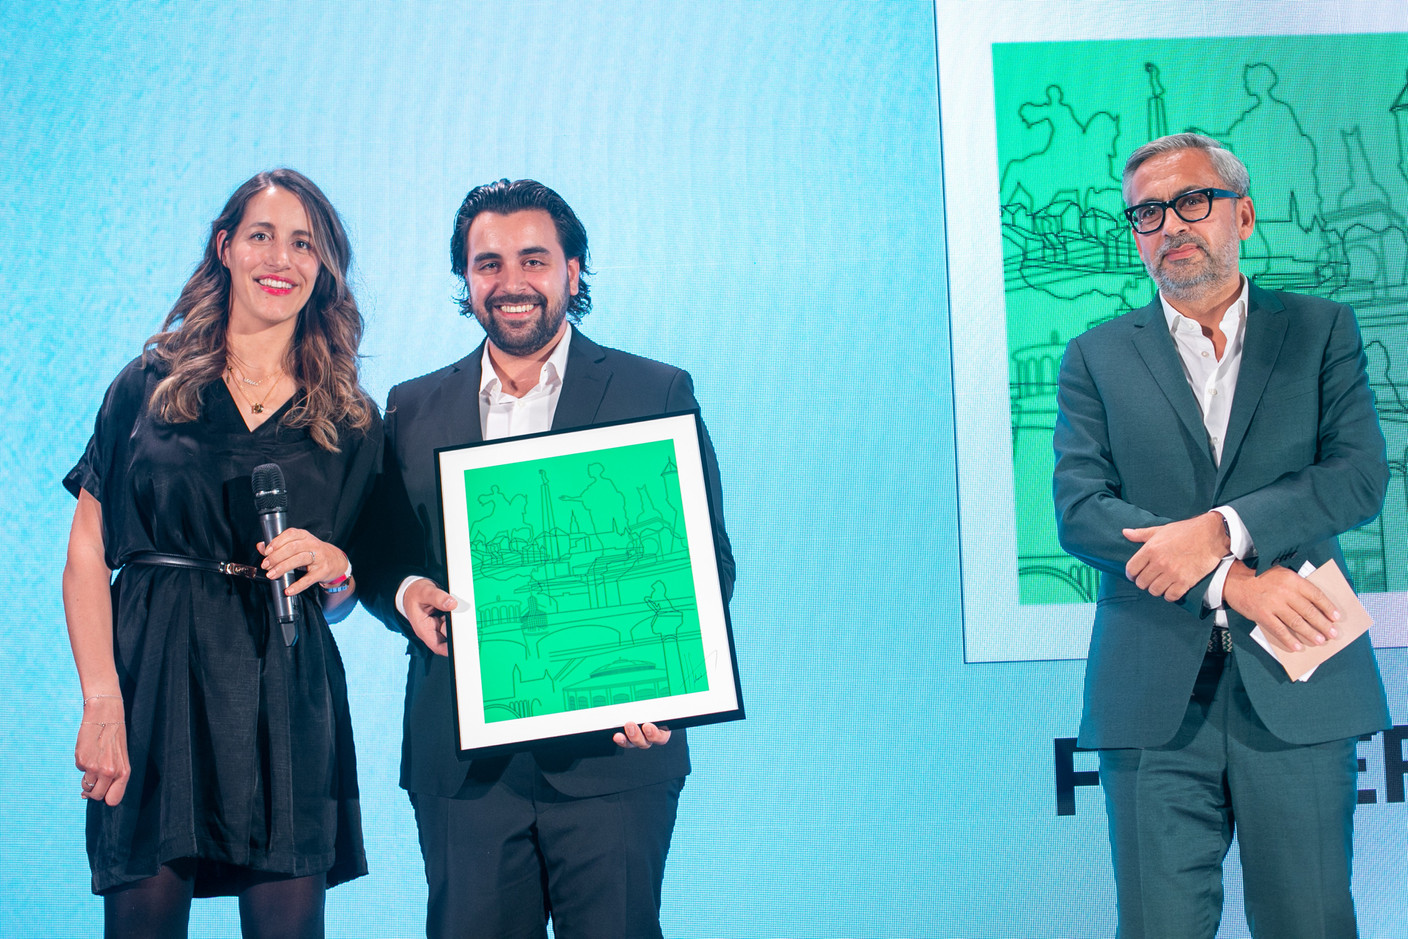 The Ferber Group was awarded in the Planet category. (Photo: Matic Zorman/Maison Moderne)